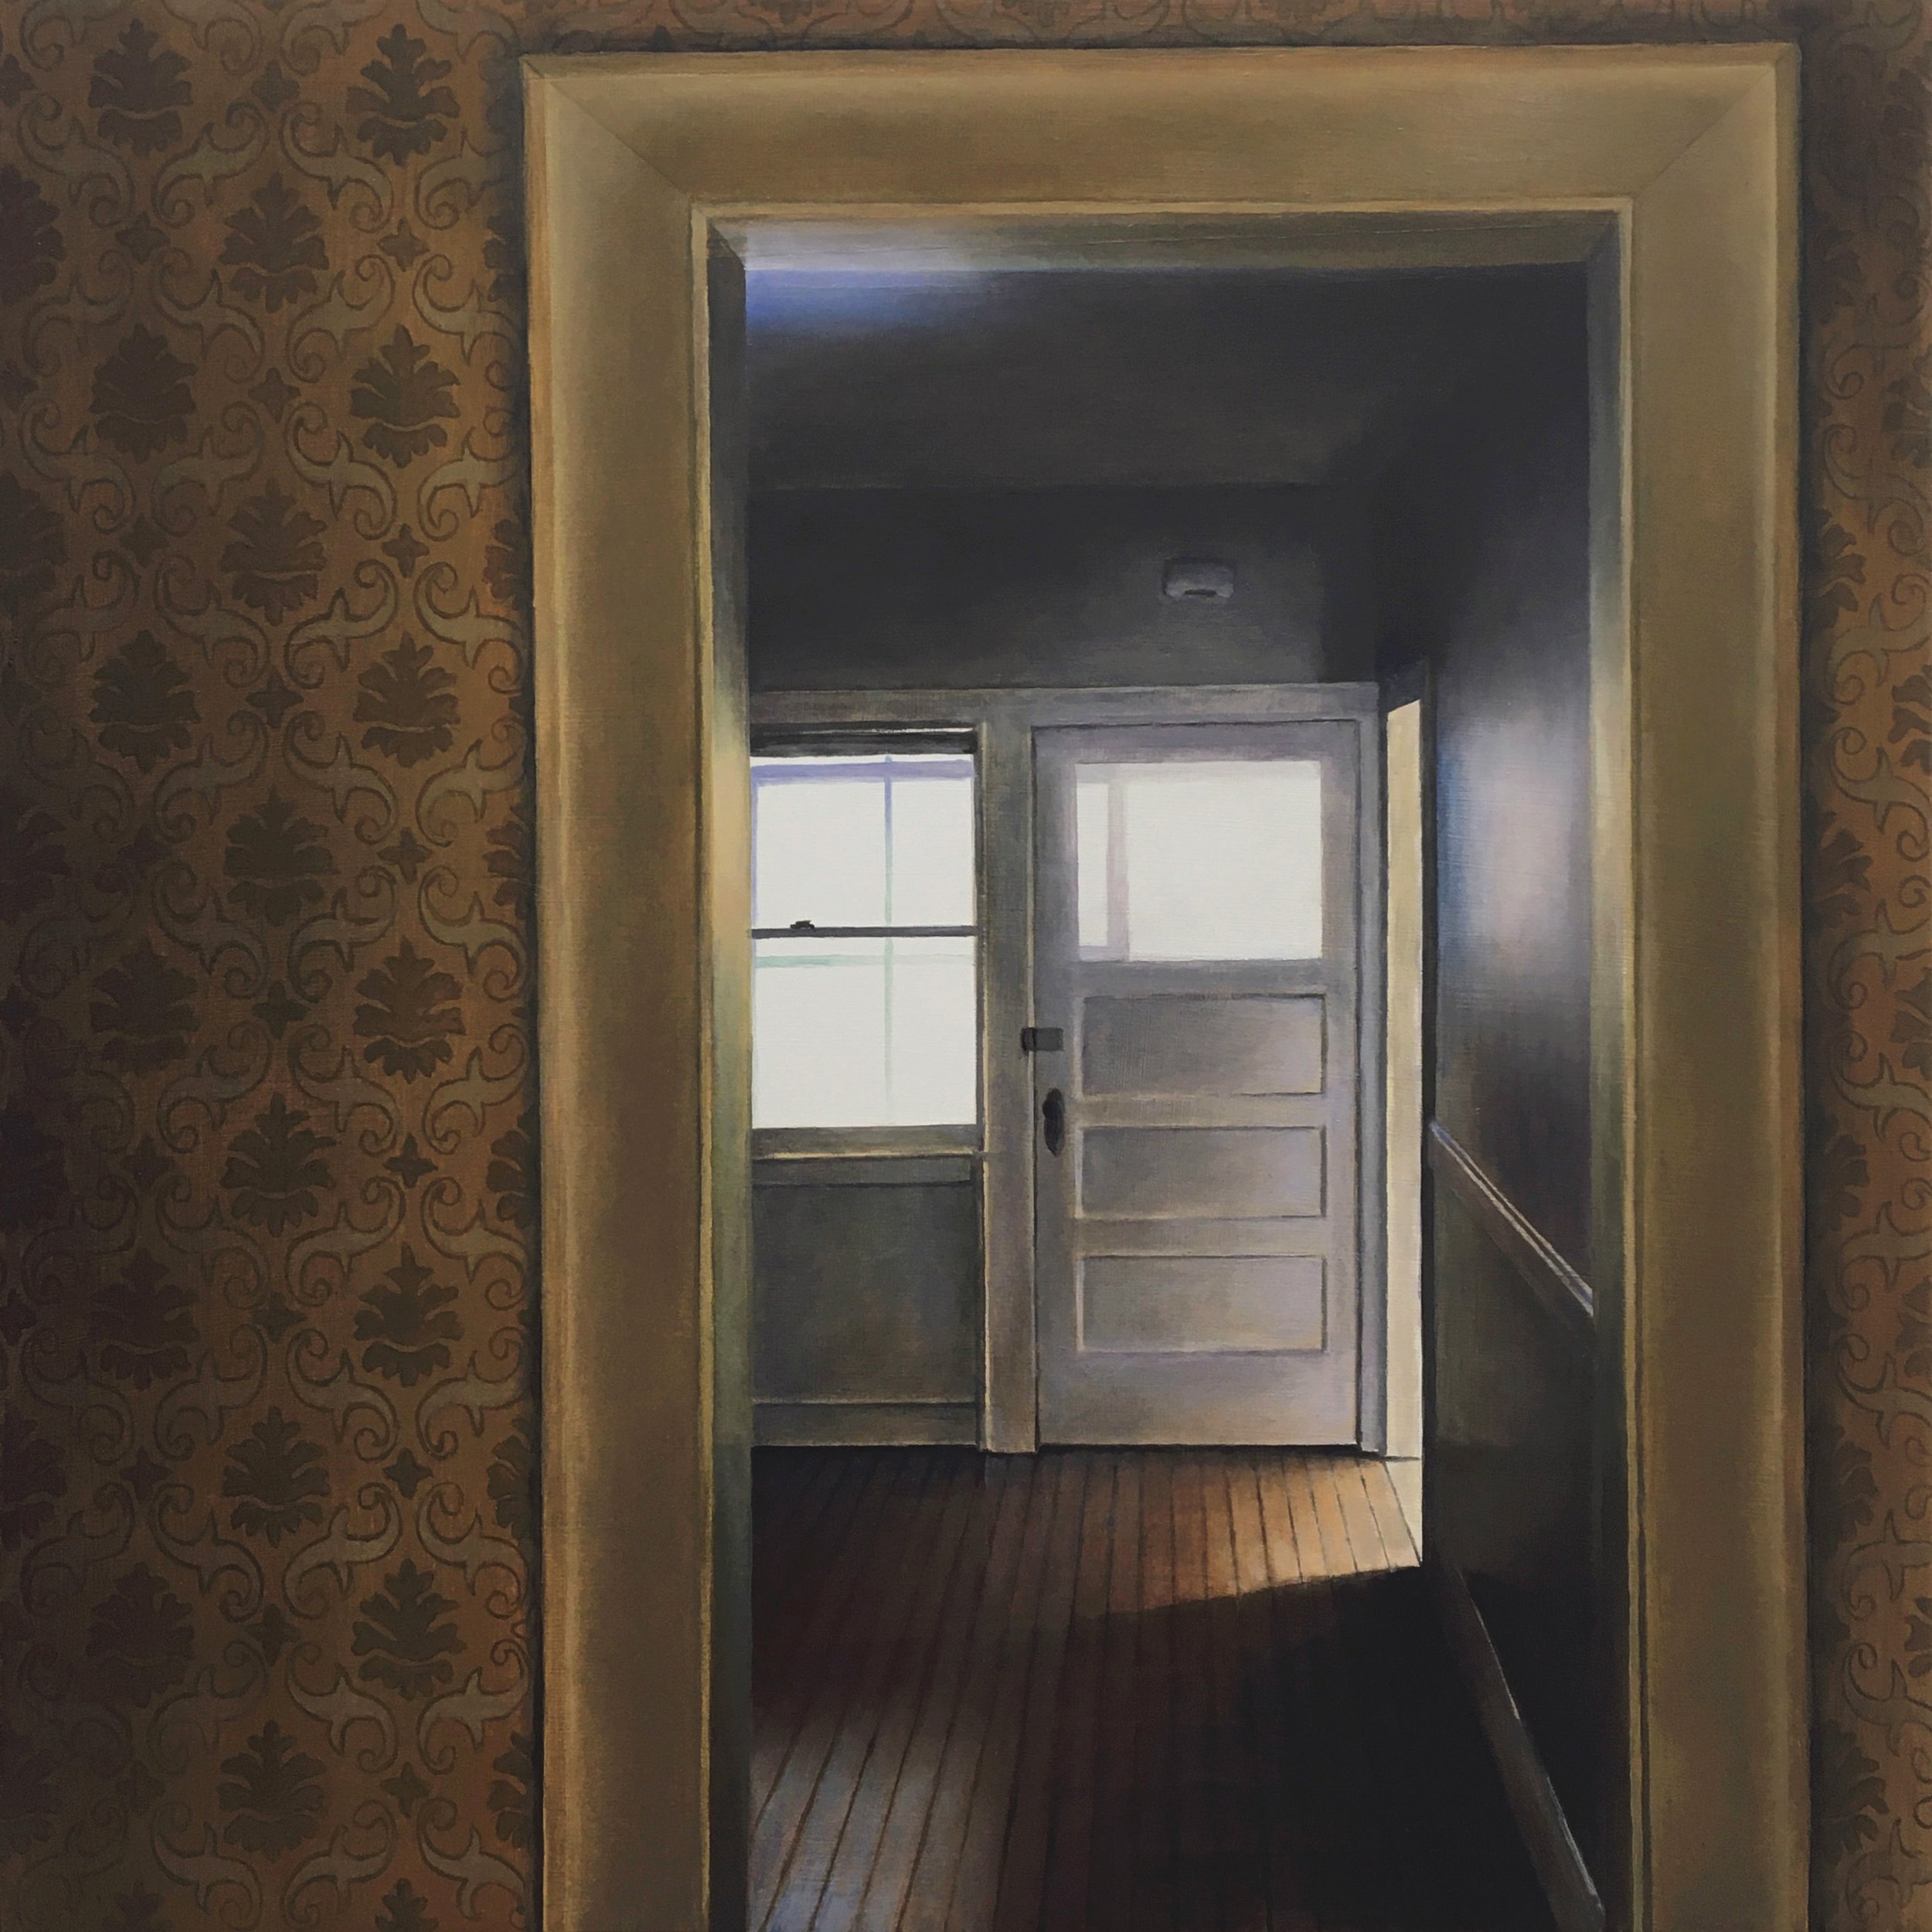   Hallway Room   2020  Oil on panel  16 x 16 inches   